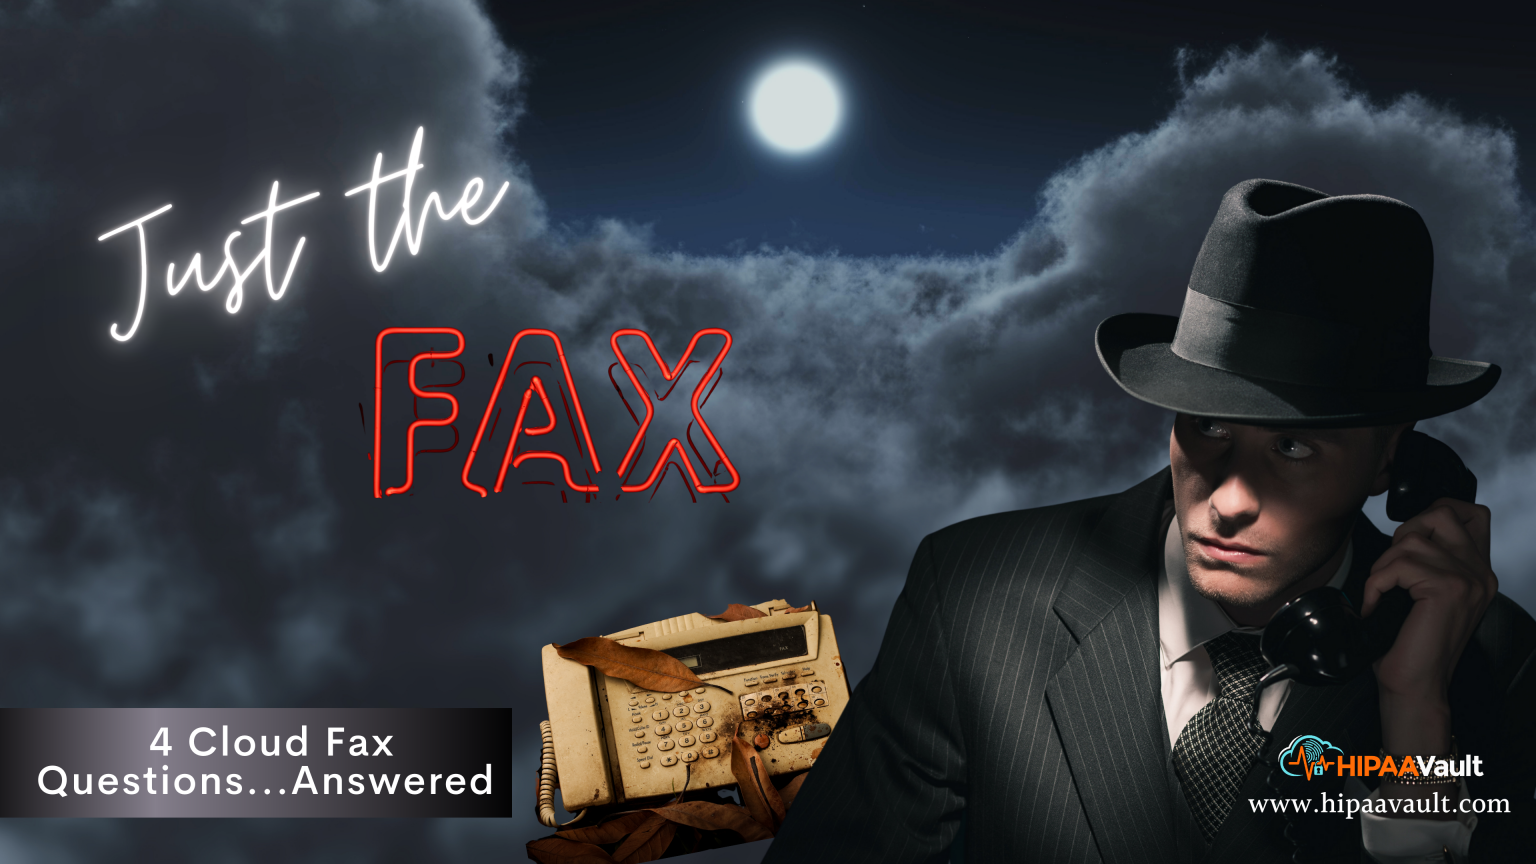 Just the Facts… 4 Key Fax Questions Answered with HIPAA Fax